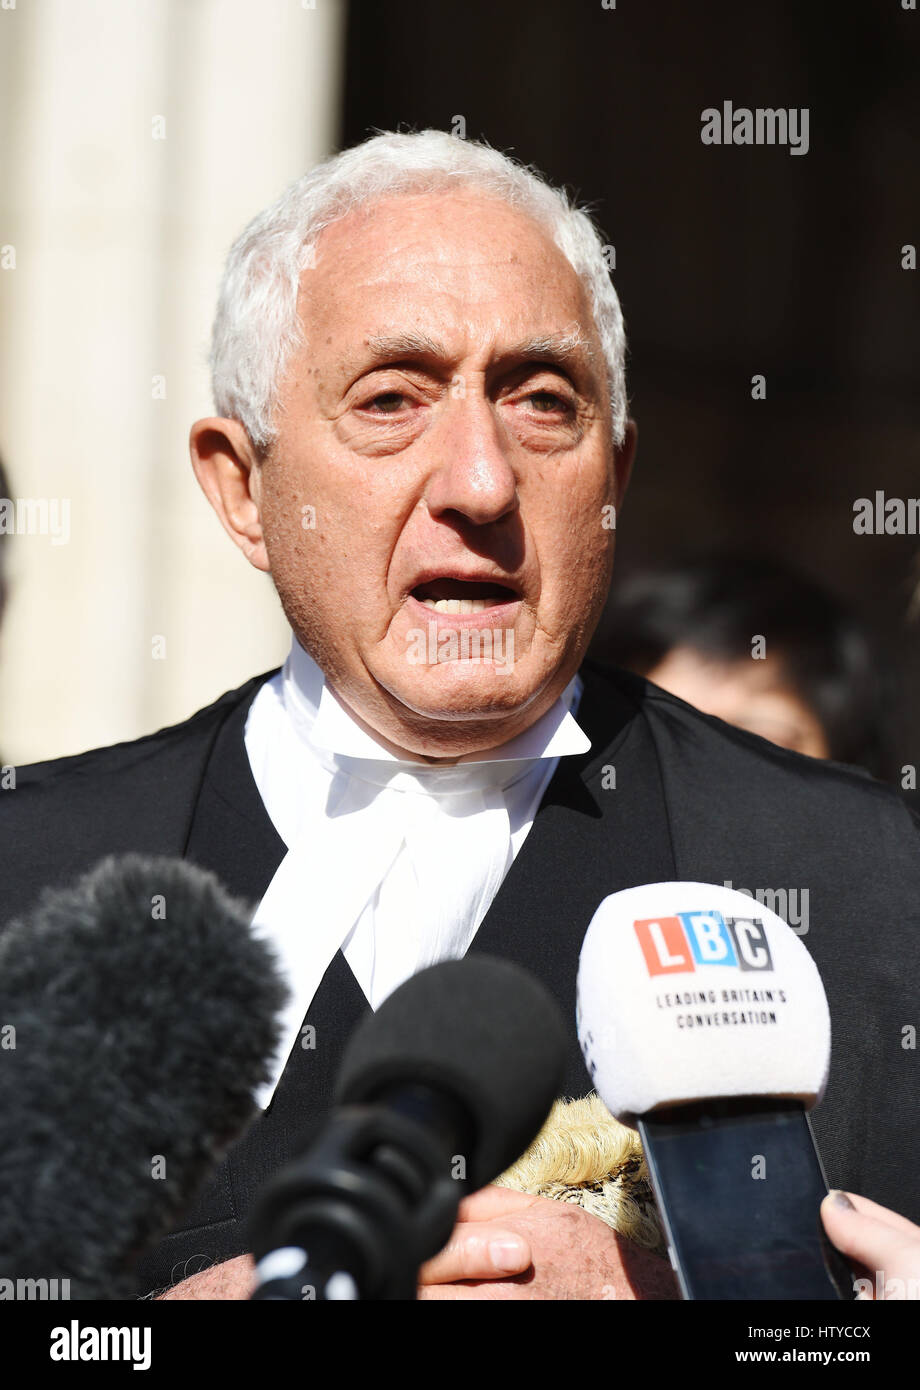 Jonathan Goldberg QC, barrister for Alexander Blackman, outside the High Court in London, where the Royal Marine Sergeant has had his murder conviction reduced to manslaughter on the ground of diminished responsibility, following an appeal to the Court Martial Appeal Court, after he shot an injured Taliban fighter in Afghanistan. Stock Photo